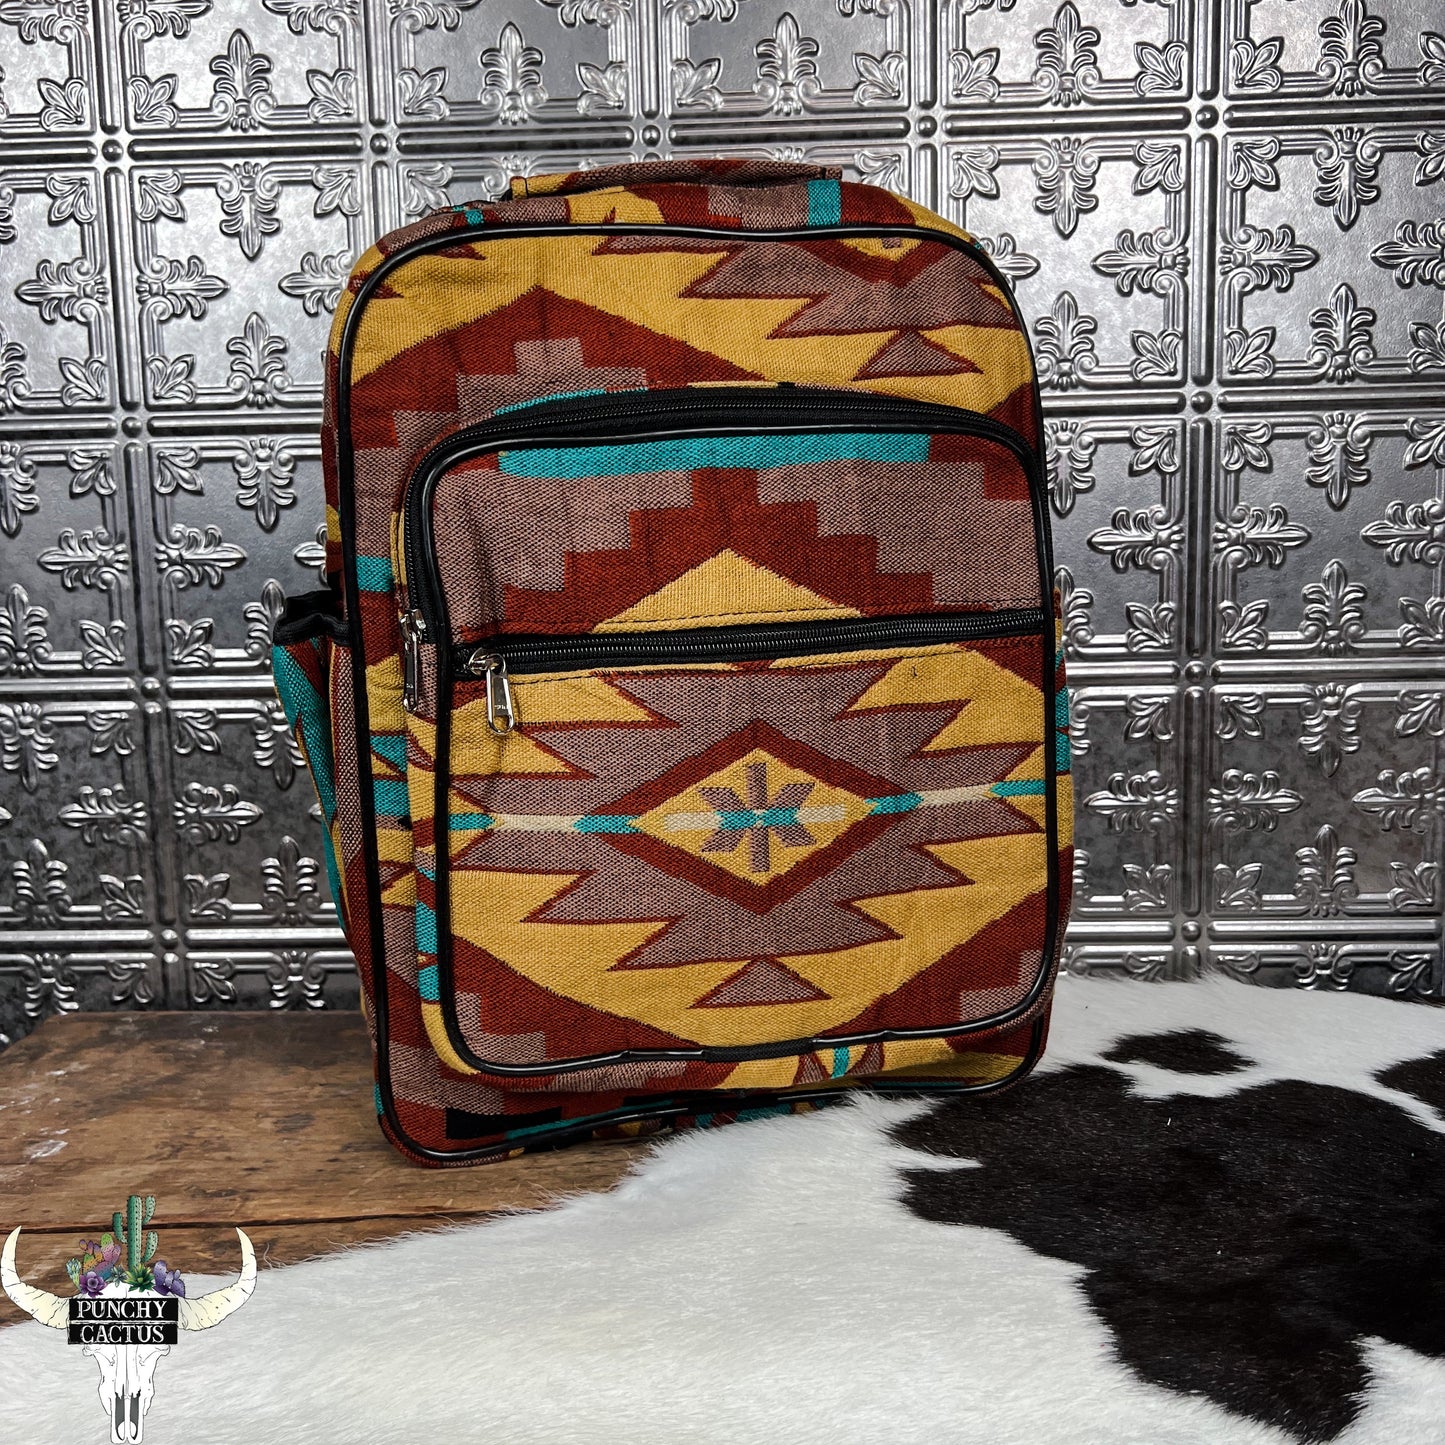 western aztec tribal print natural colors backpack with laptop slot